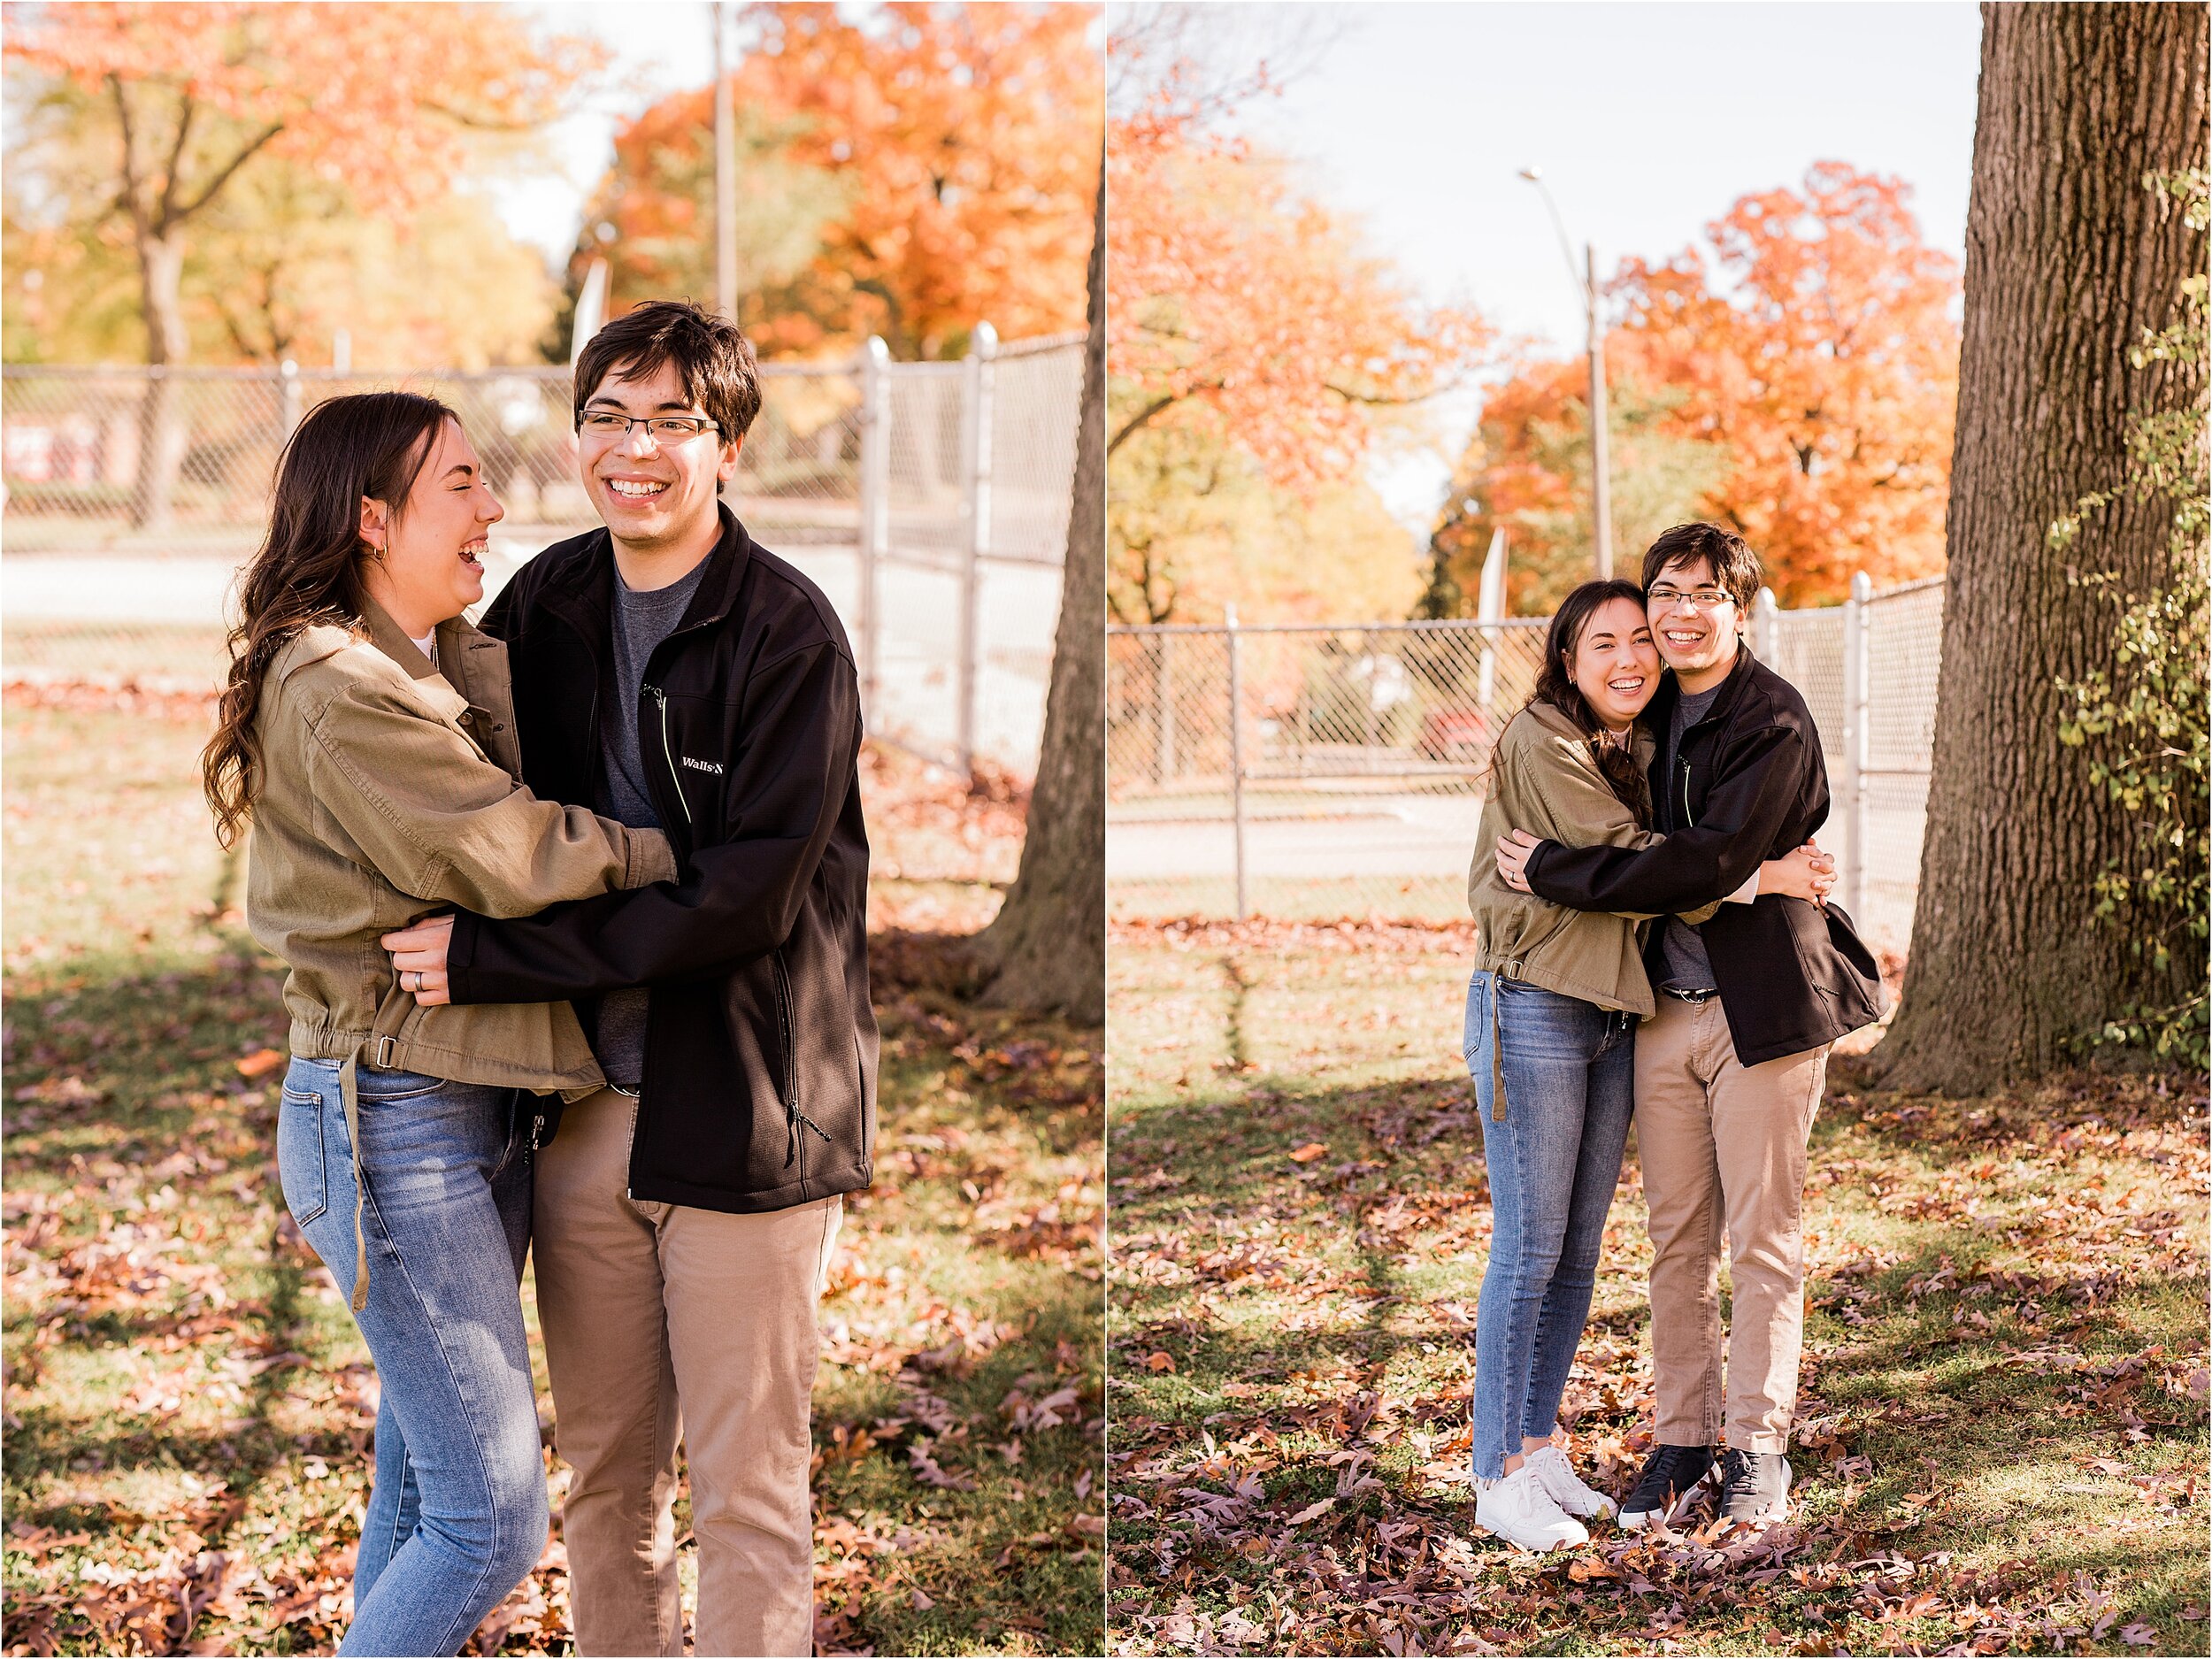 Chicago proposal photographer